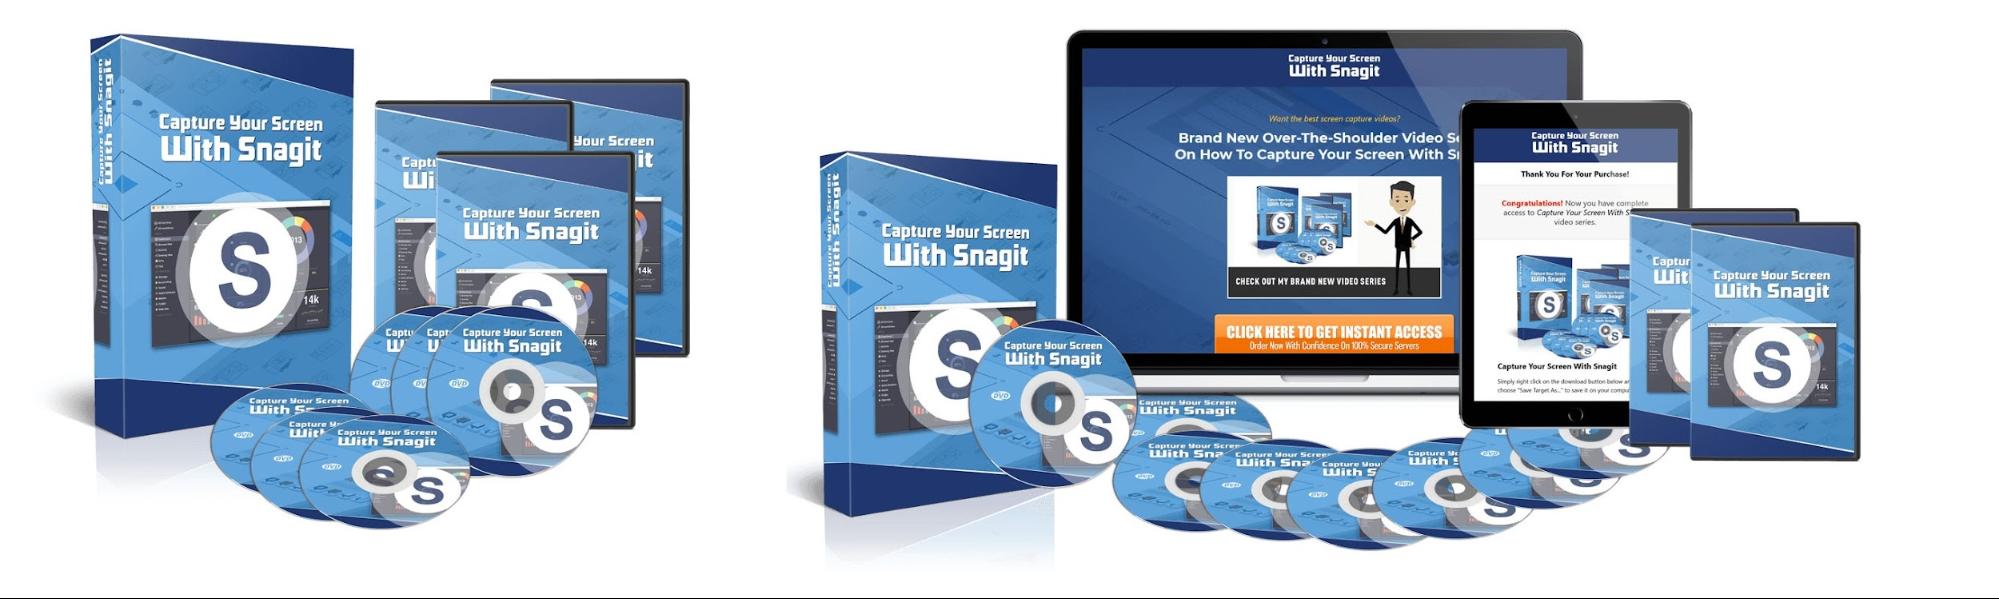 Capture Your Screen With Snagit – 40 videos course